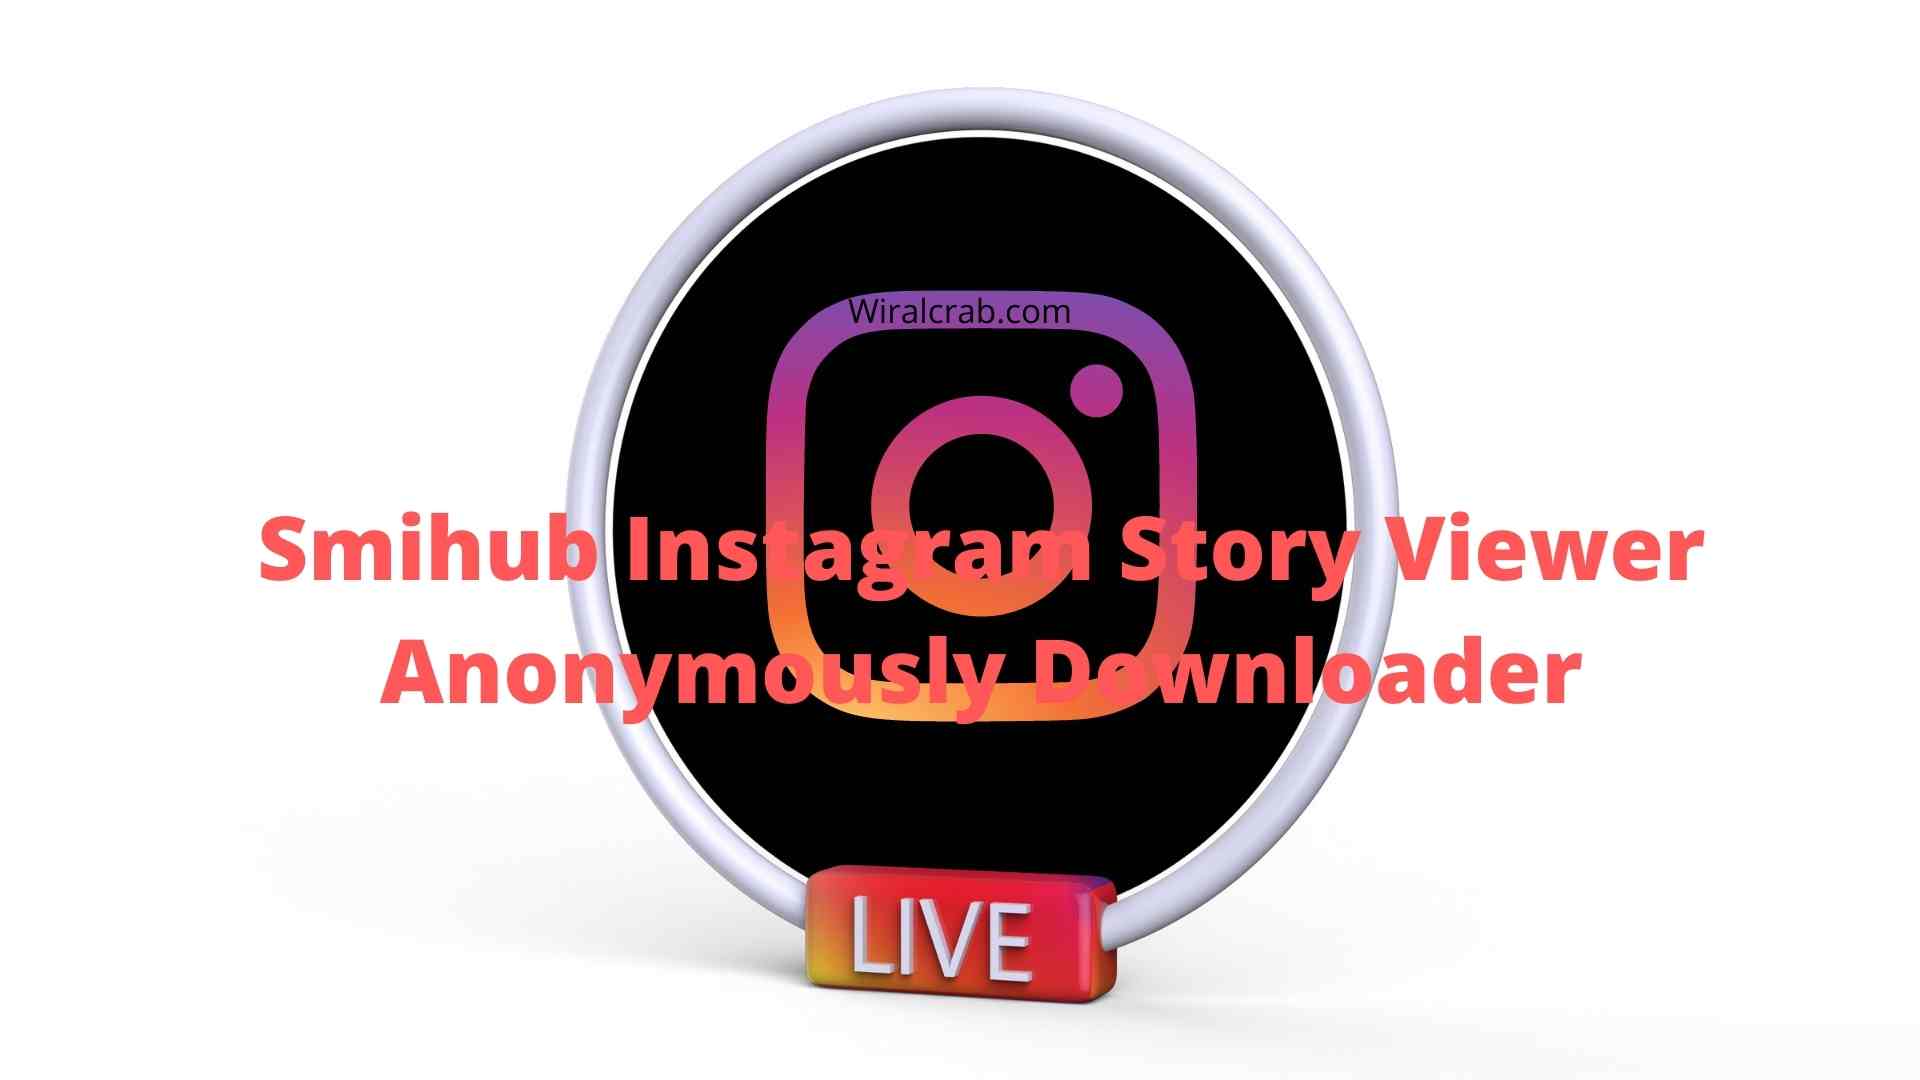 Smihub Instagram Story Viewer Anonymously Downloader